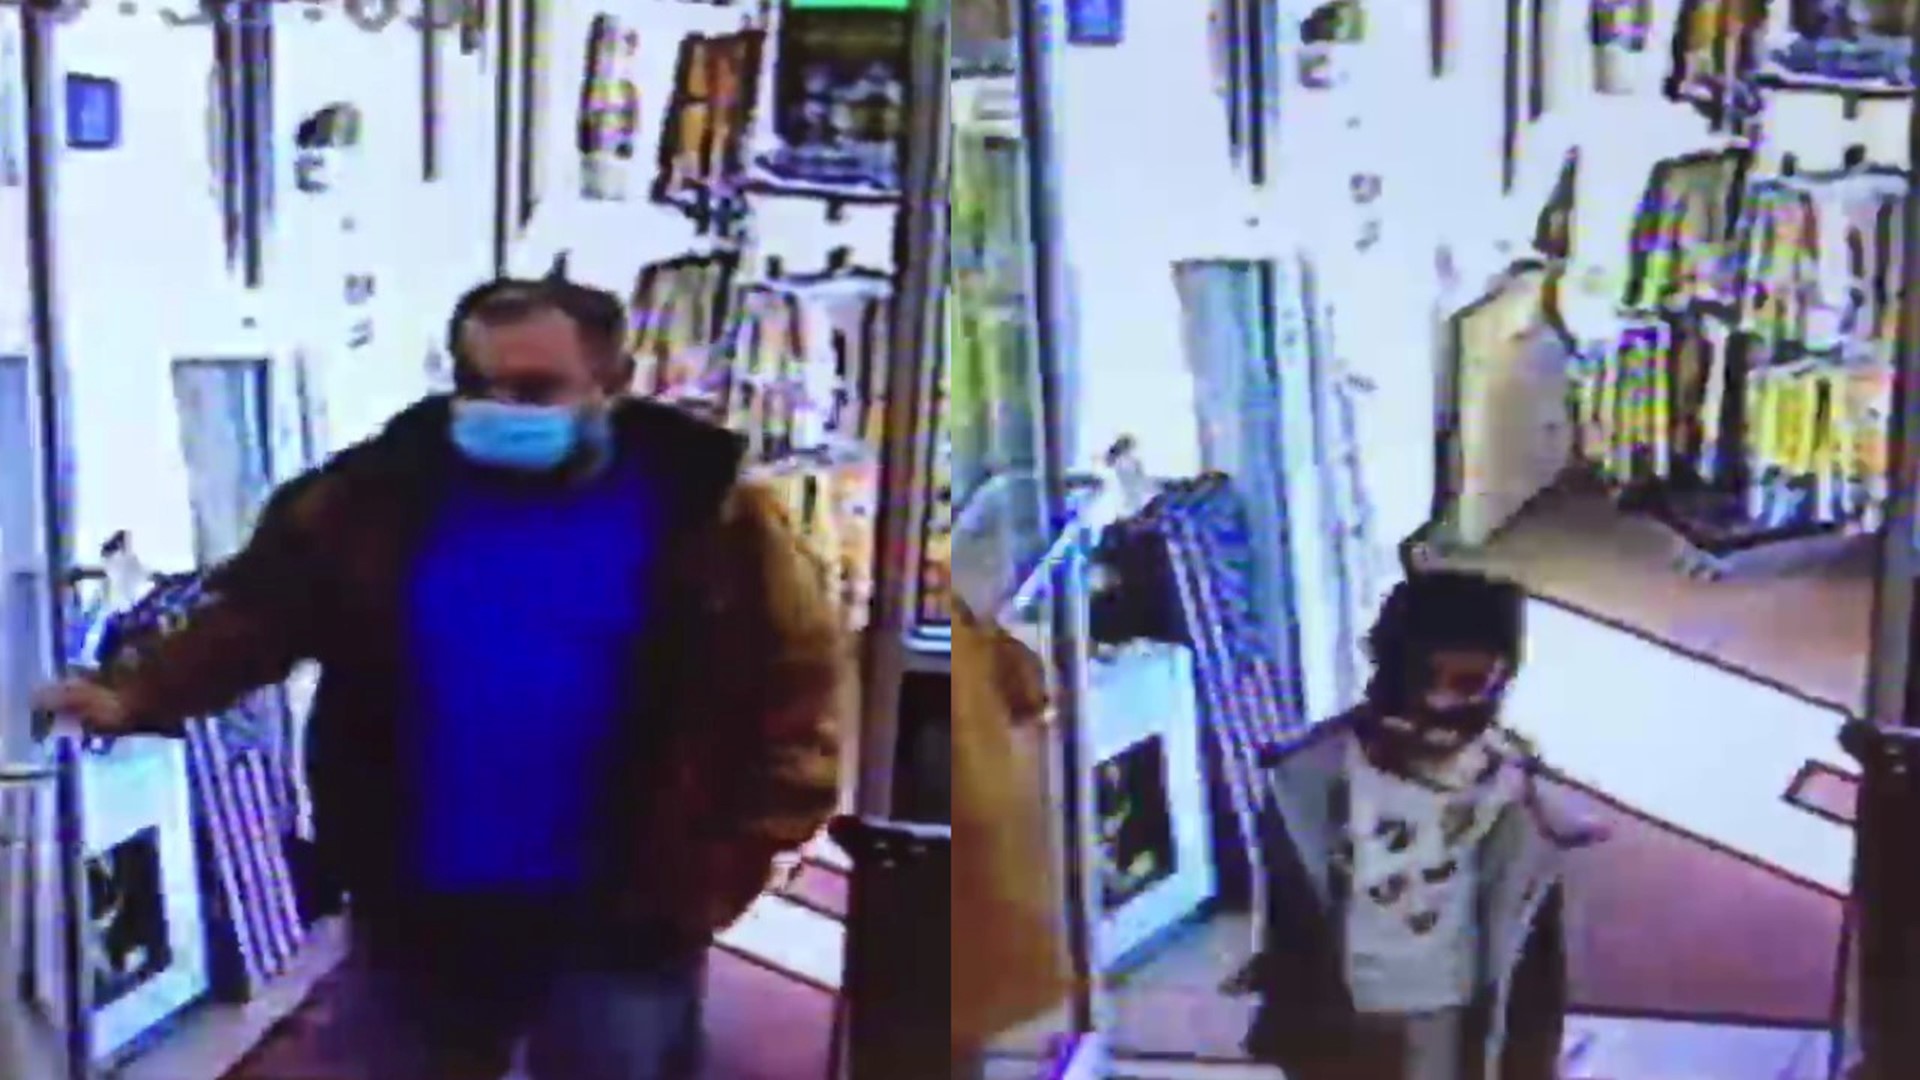 Scott Township police say the thefts occurred at Cole's Hardware and the man brings a young child with him each time.